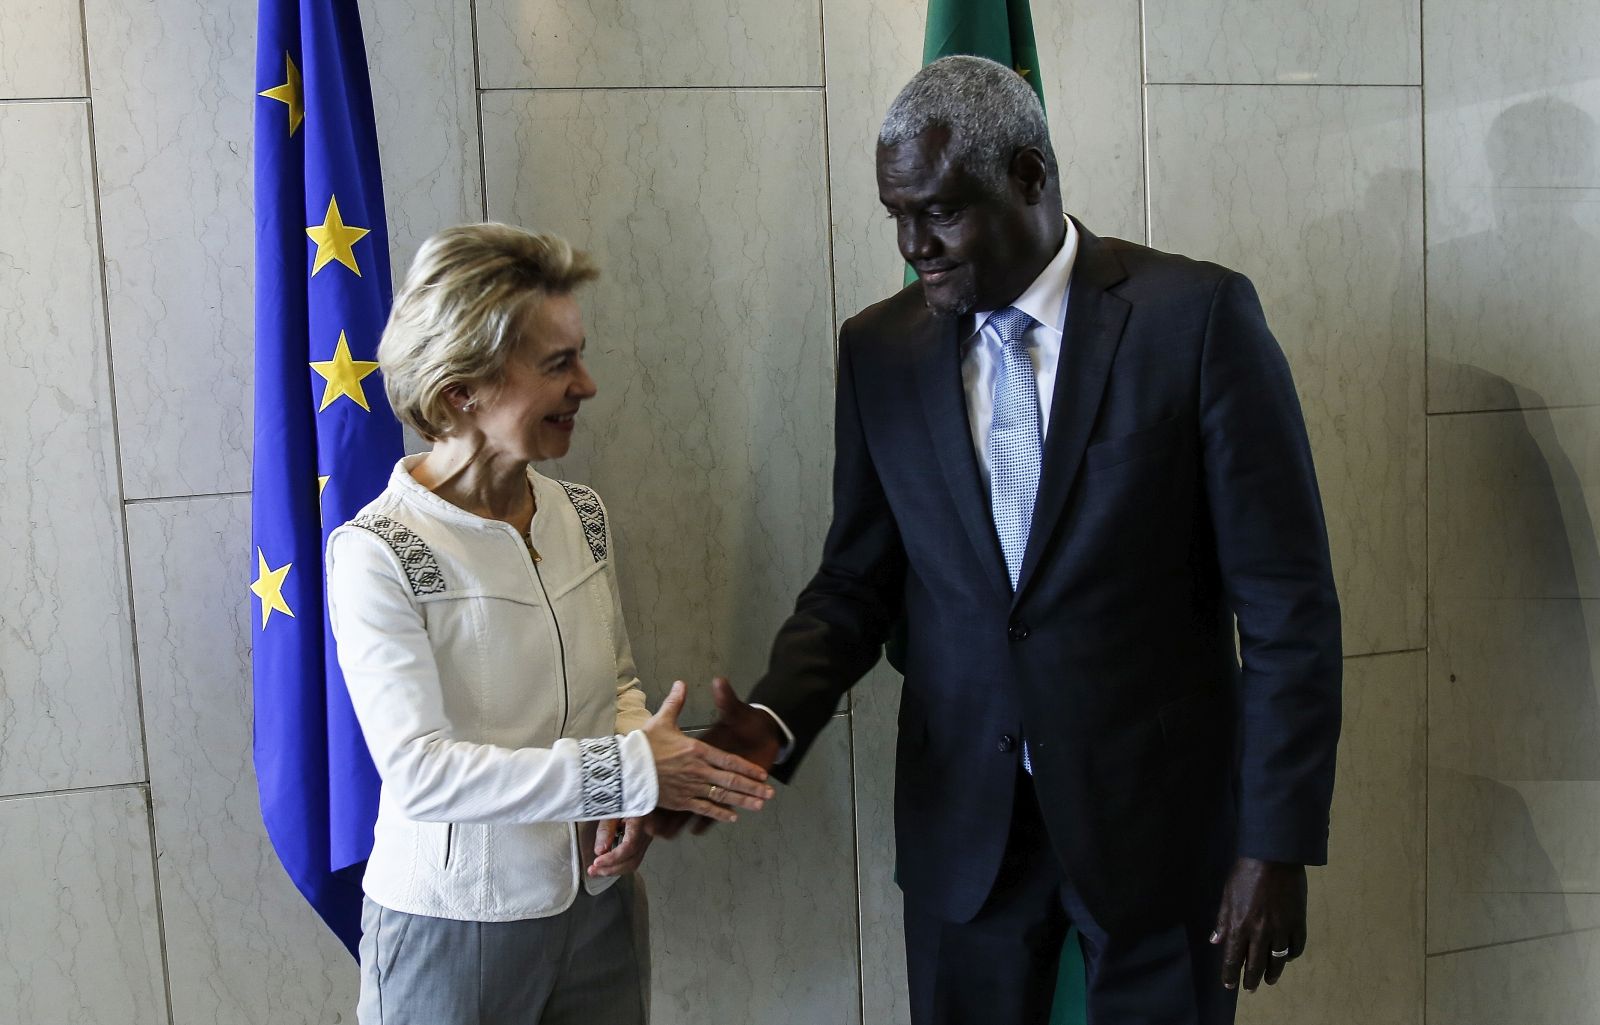 EU Commission President Ursula von der Leyen and the chairperson of the African Union Commission, Moussa Faki Mahamat, at a meeting in February in Ethiopia.